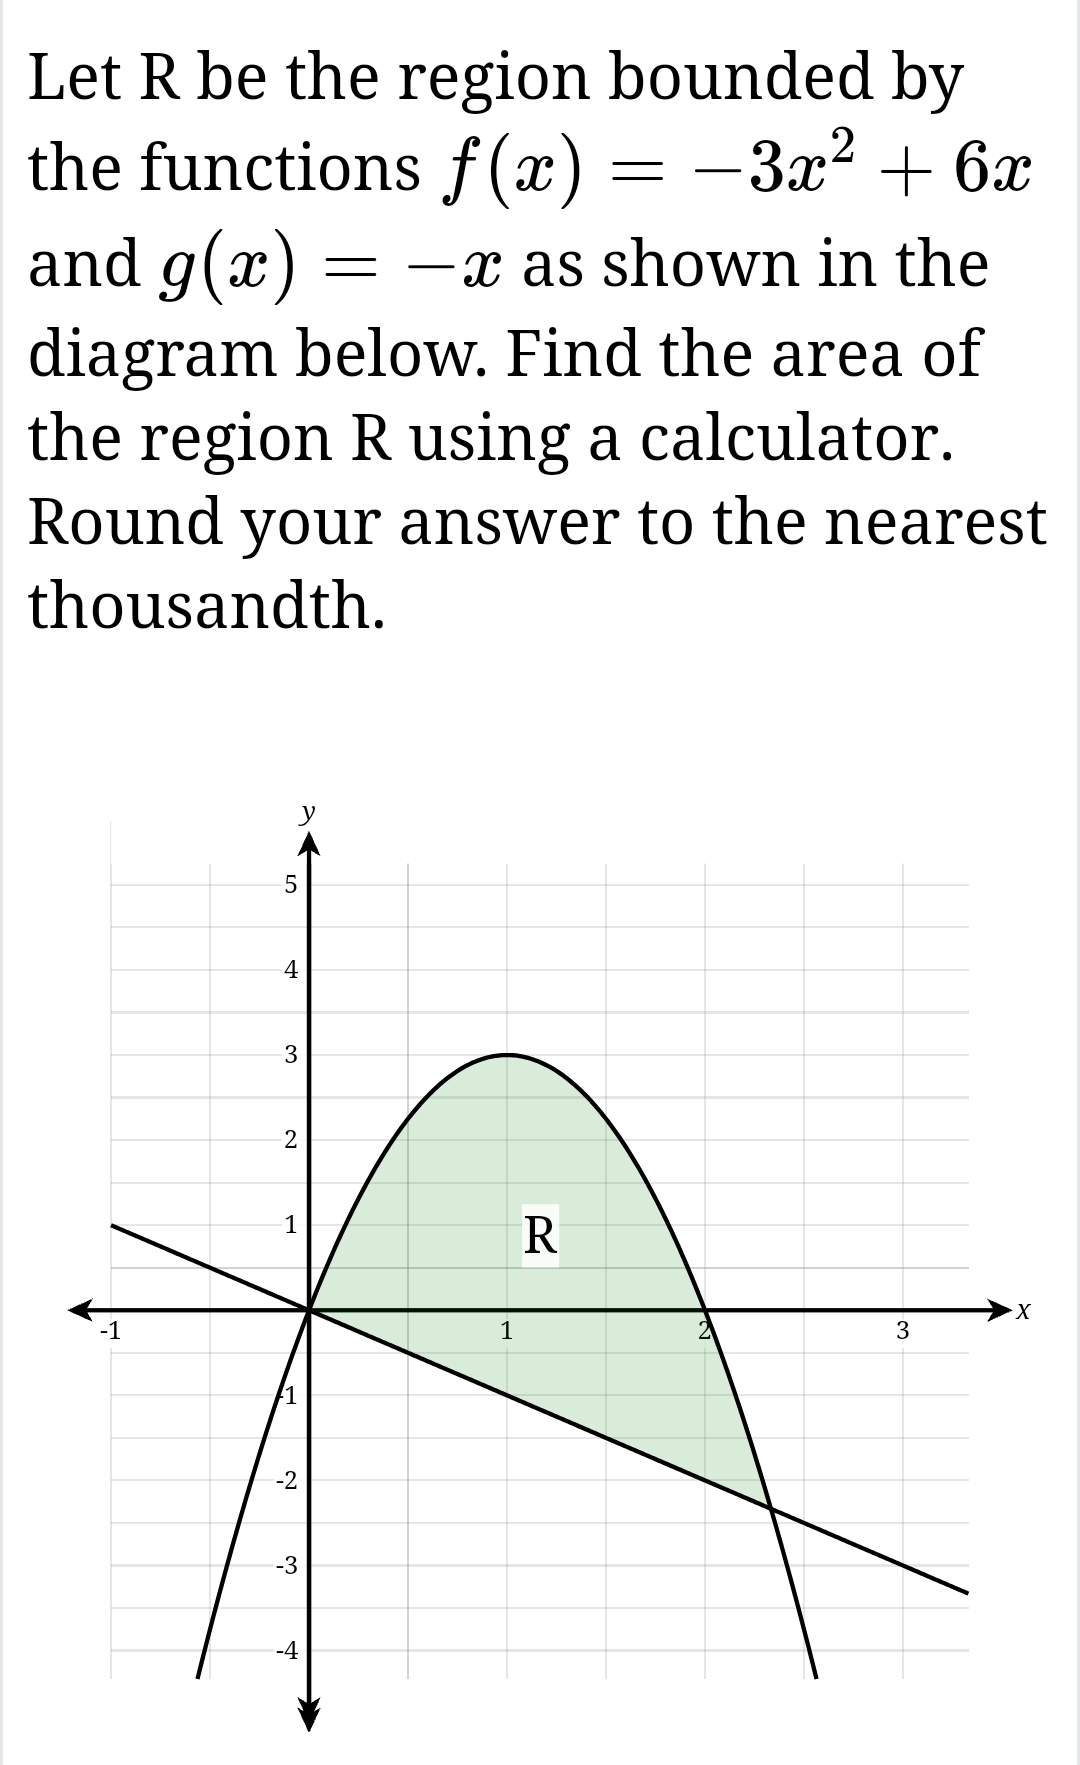 Let R be the region bounded by
2
the functions f(x) -3x² + 6x
and g(x)
-
=
―x as shown in the
diagram below. Find the area of
the region R using a calculator.
Round your answer to the nearest
thousandth.
-1
y
5
4
3
21
1
R
T
-2
-3
-4
1
X
3